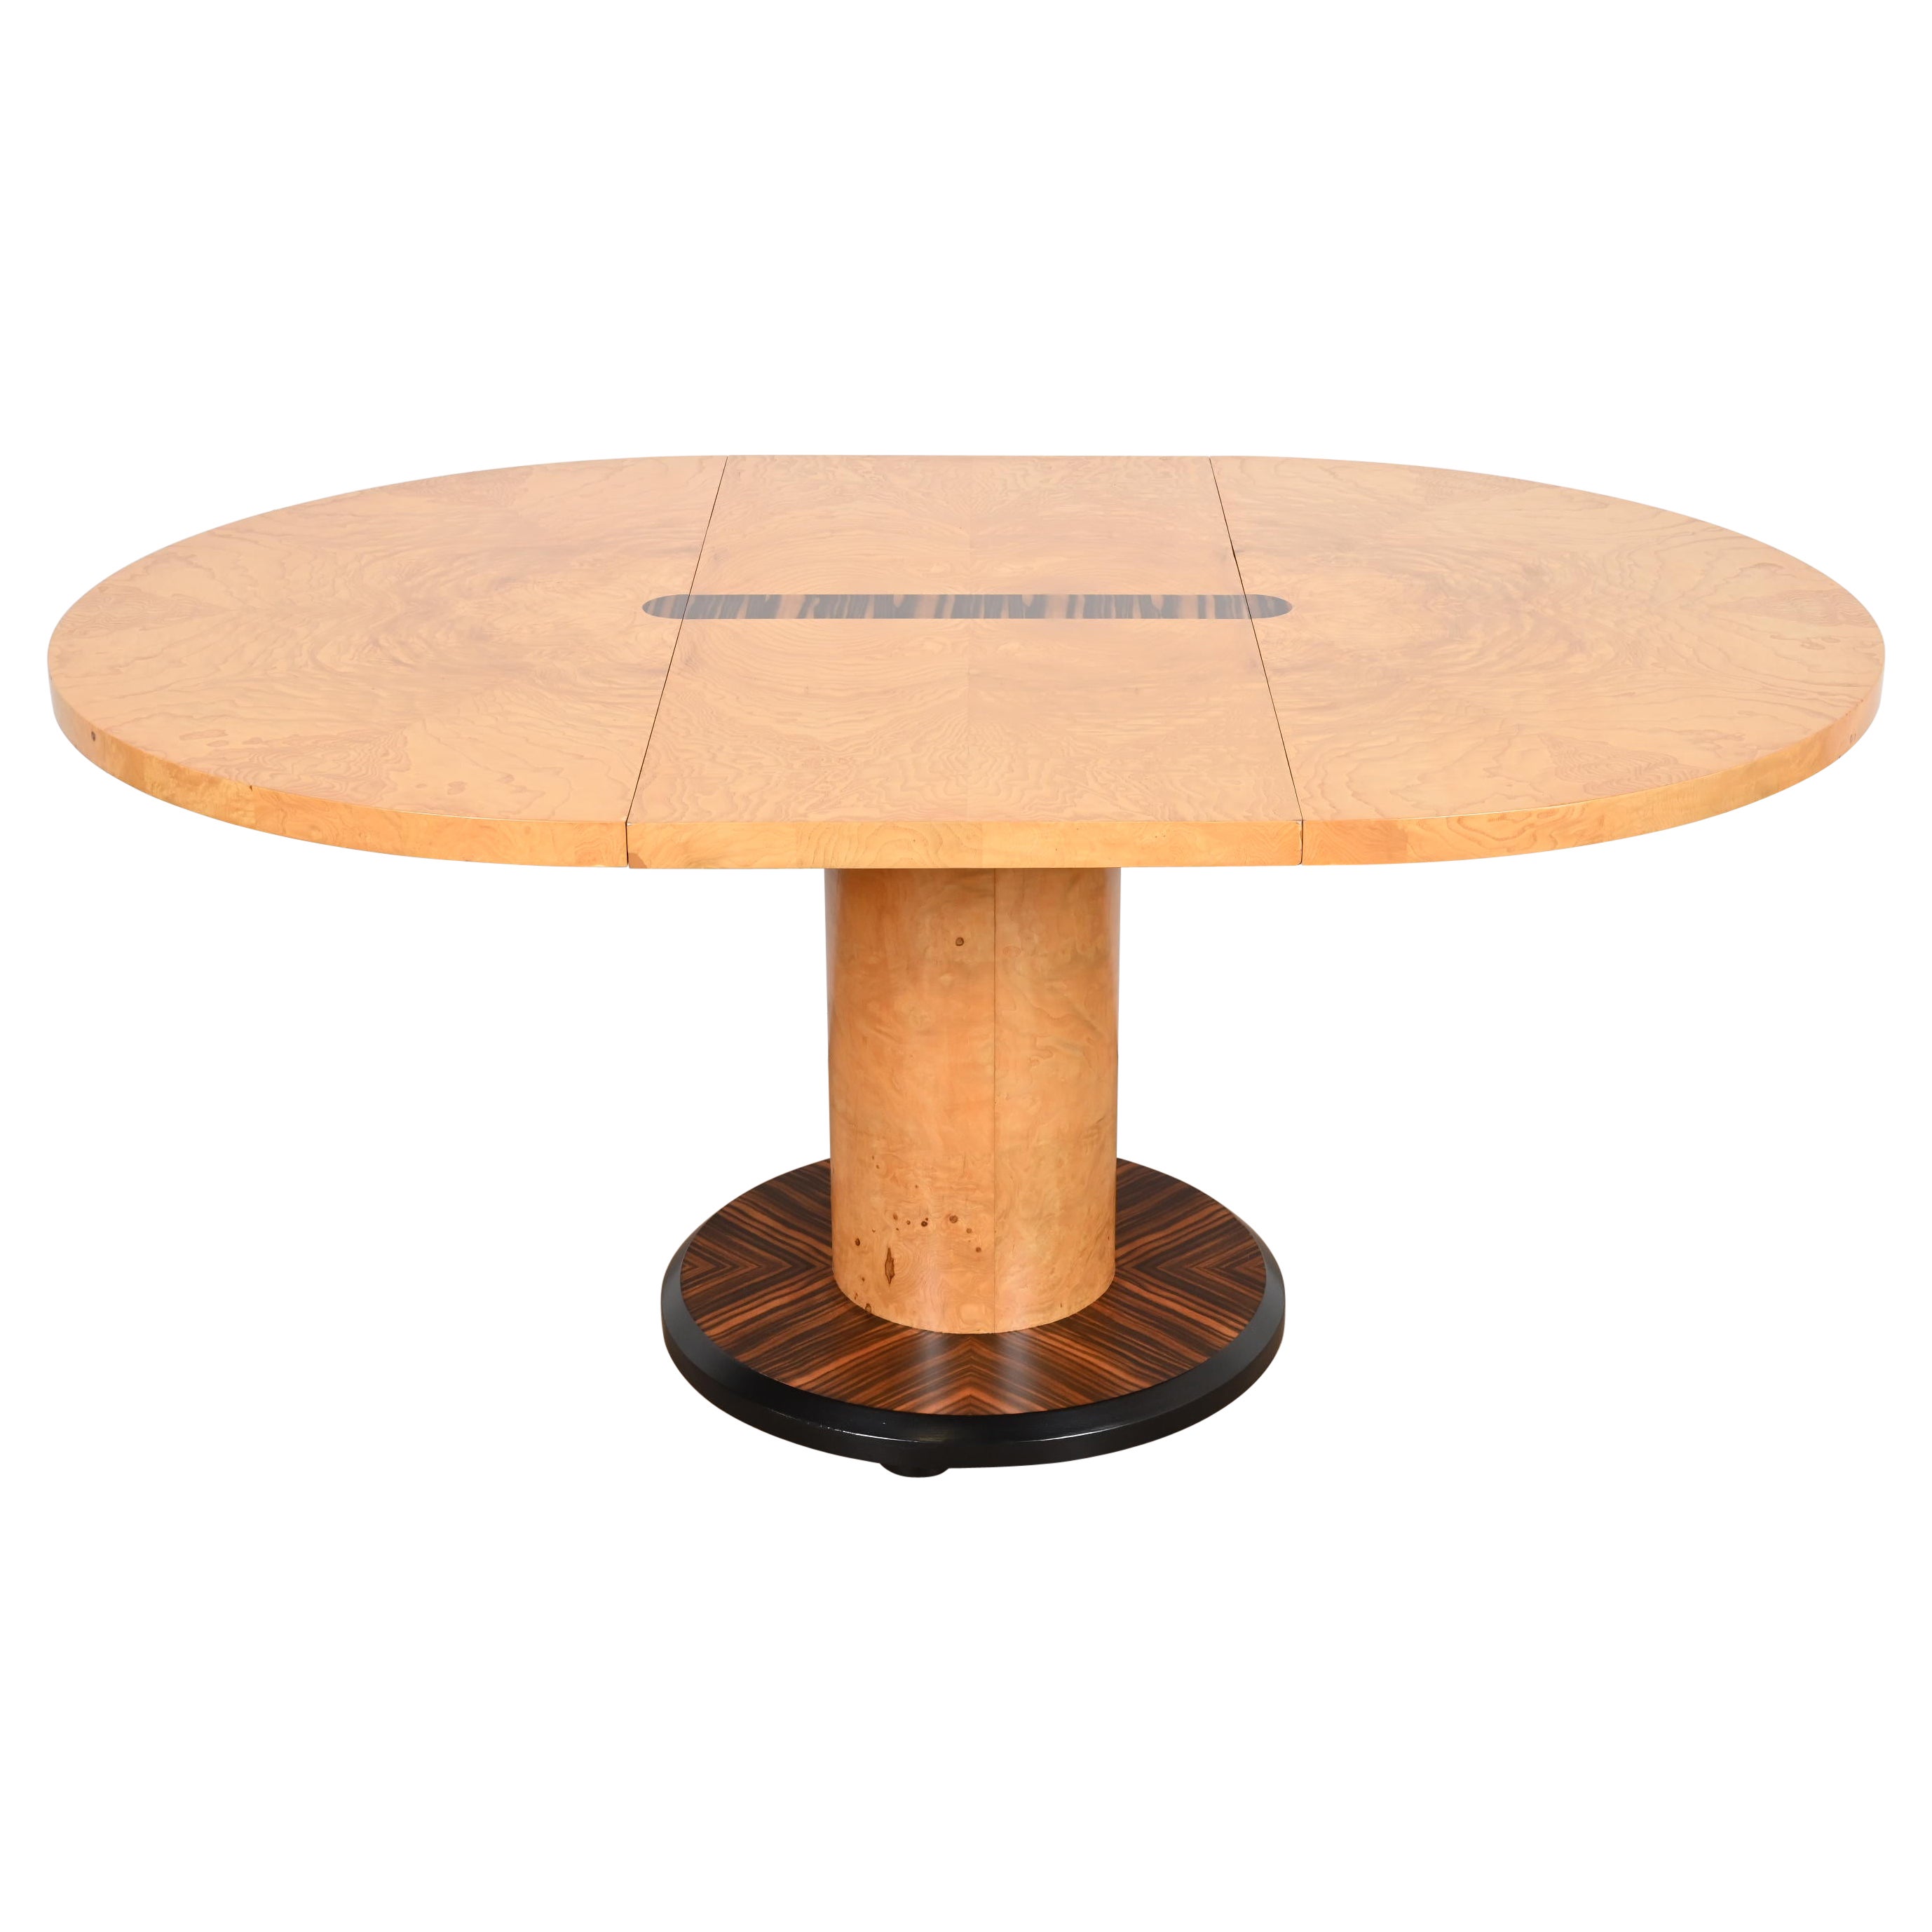 Milo Baughman Style Mid-Century Modern Burl Wood and Macassar Dining Table For Sale